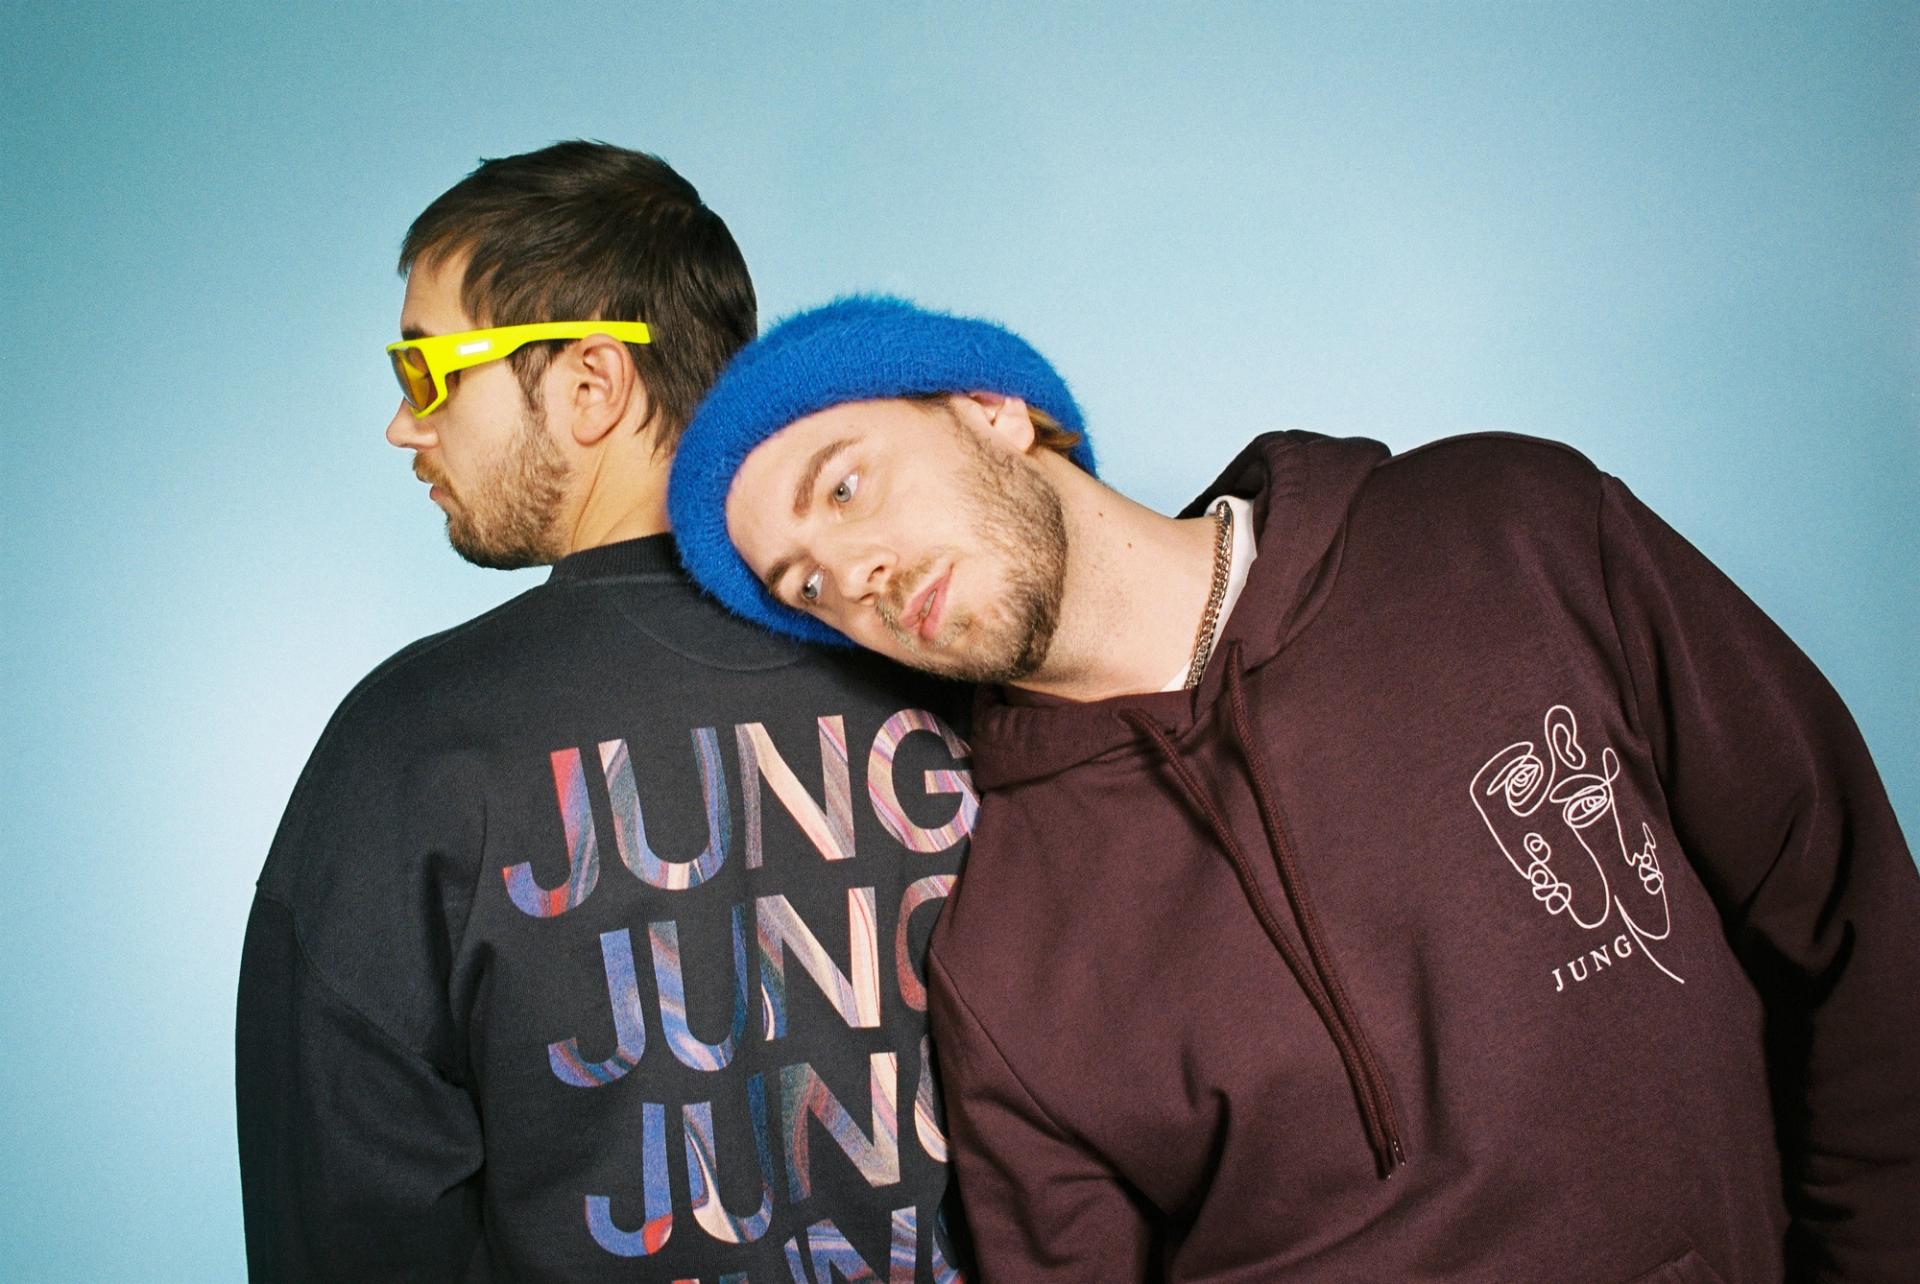 Jung are part of the new wave of Scandinavian artists evolving the melodic pop sound. With a wide range of influences, their artistry extends beyond the recording studio into the visual sphere.